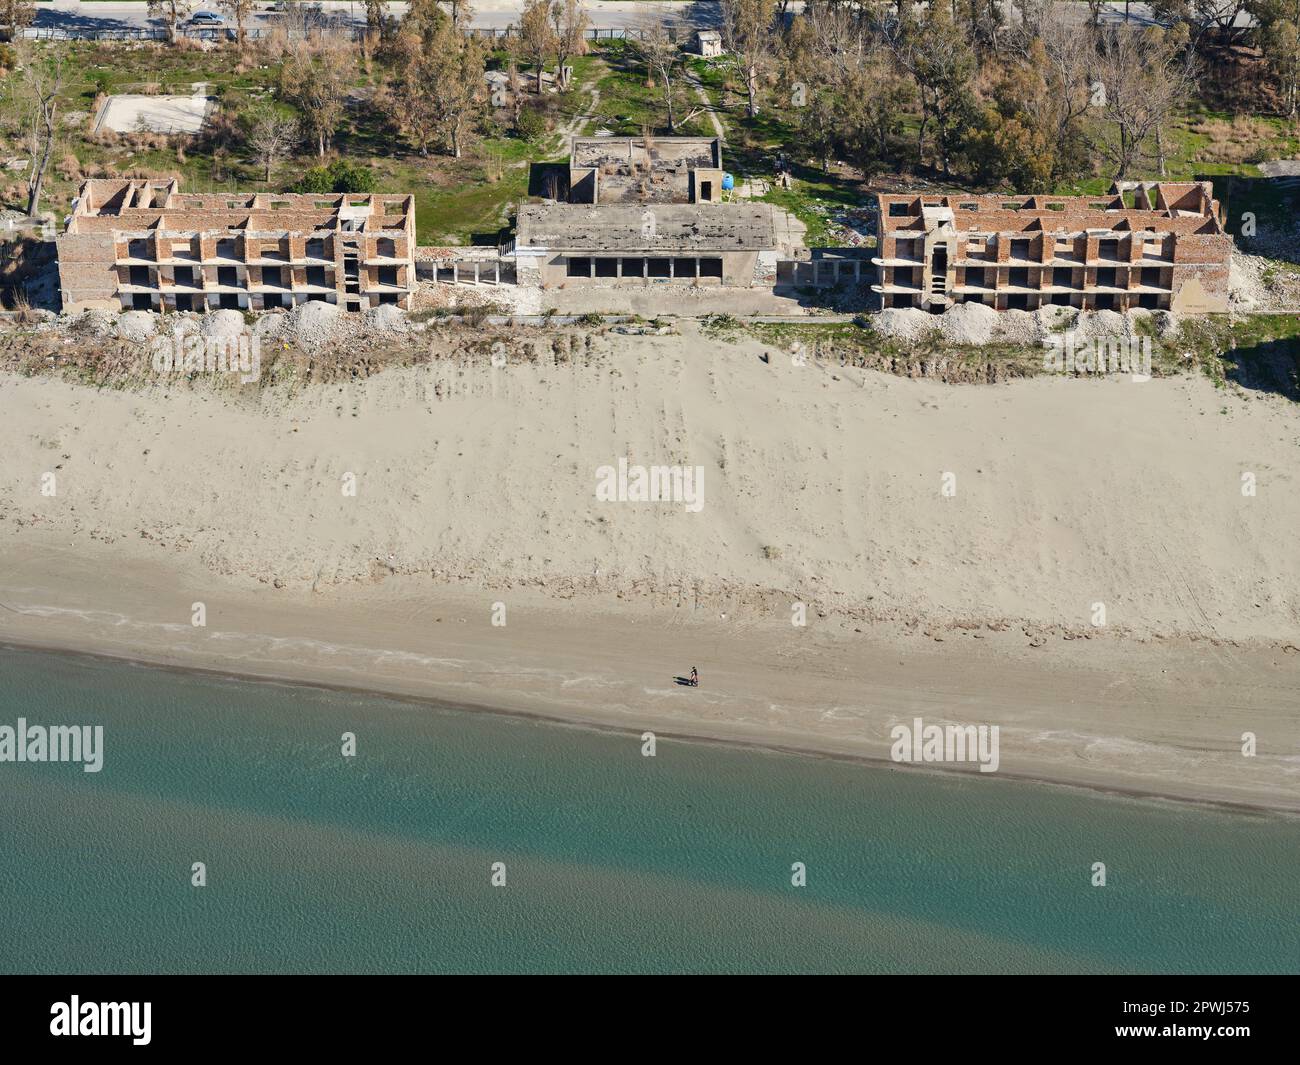 AERIAL VIEW. Abandoned multistory housings on a beach in the city of Vlorë. Vlorë County, Albania. Stock Photo